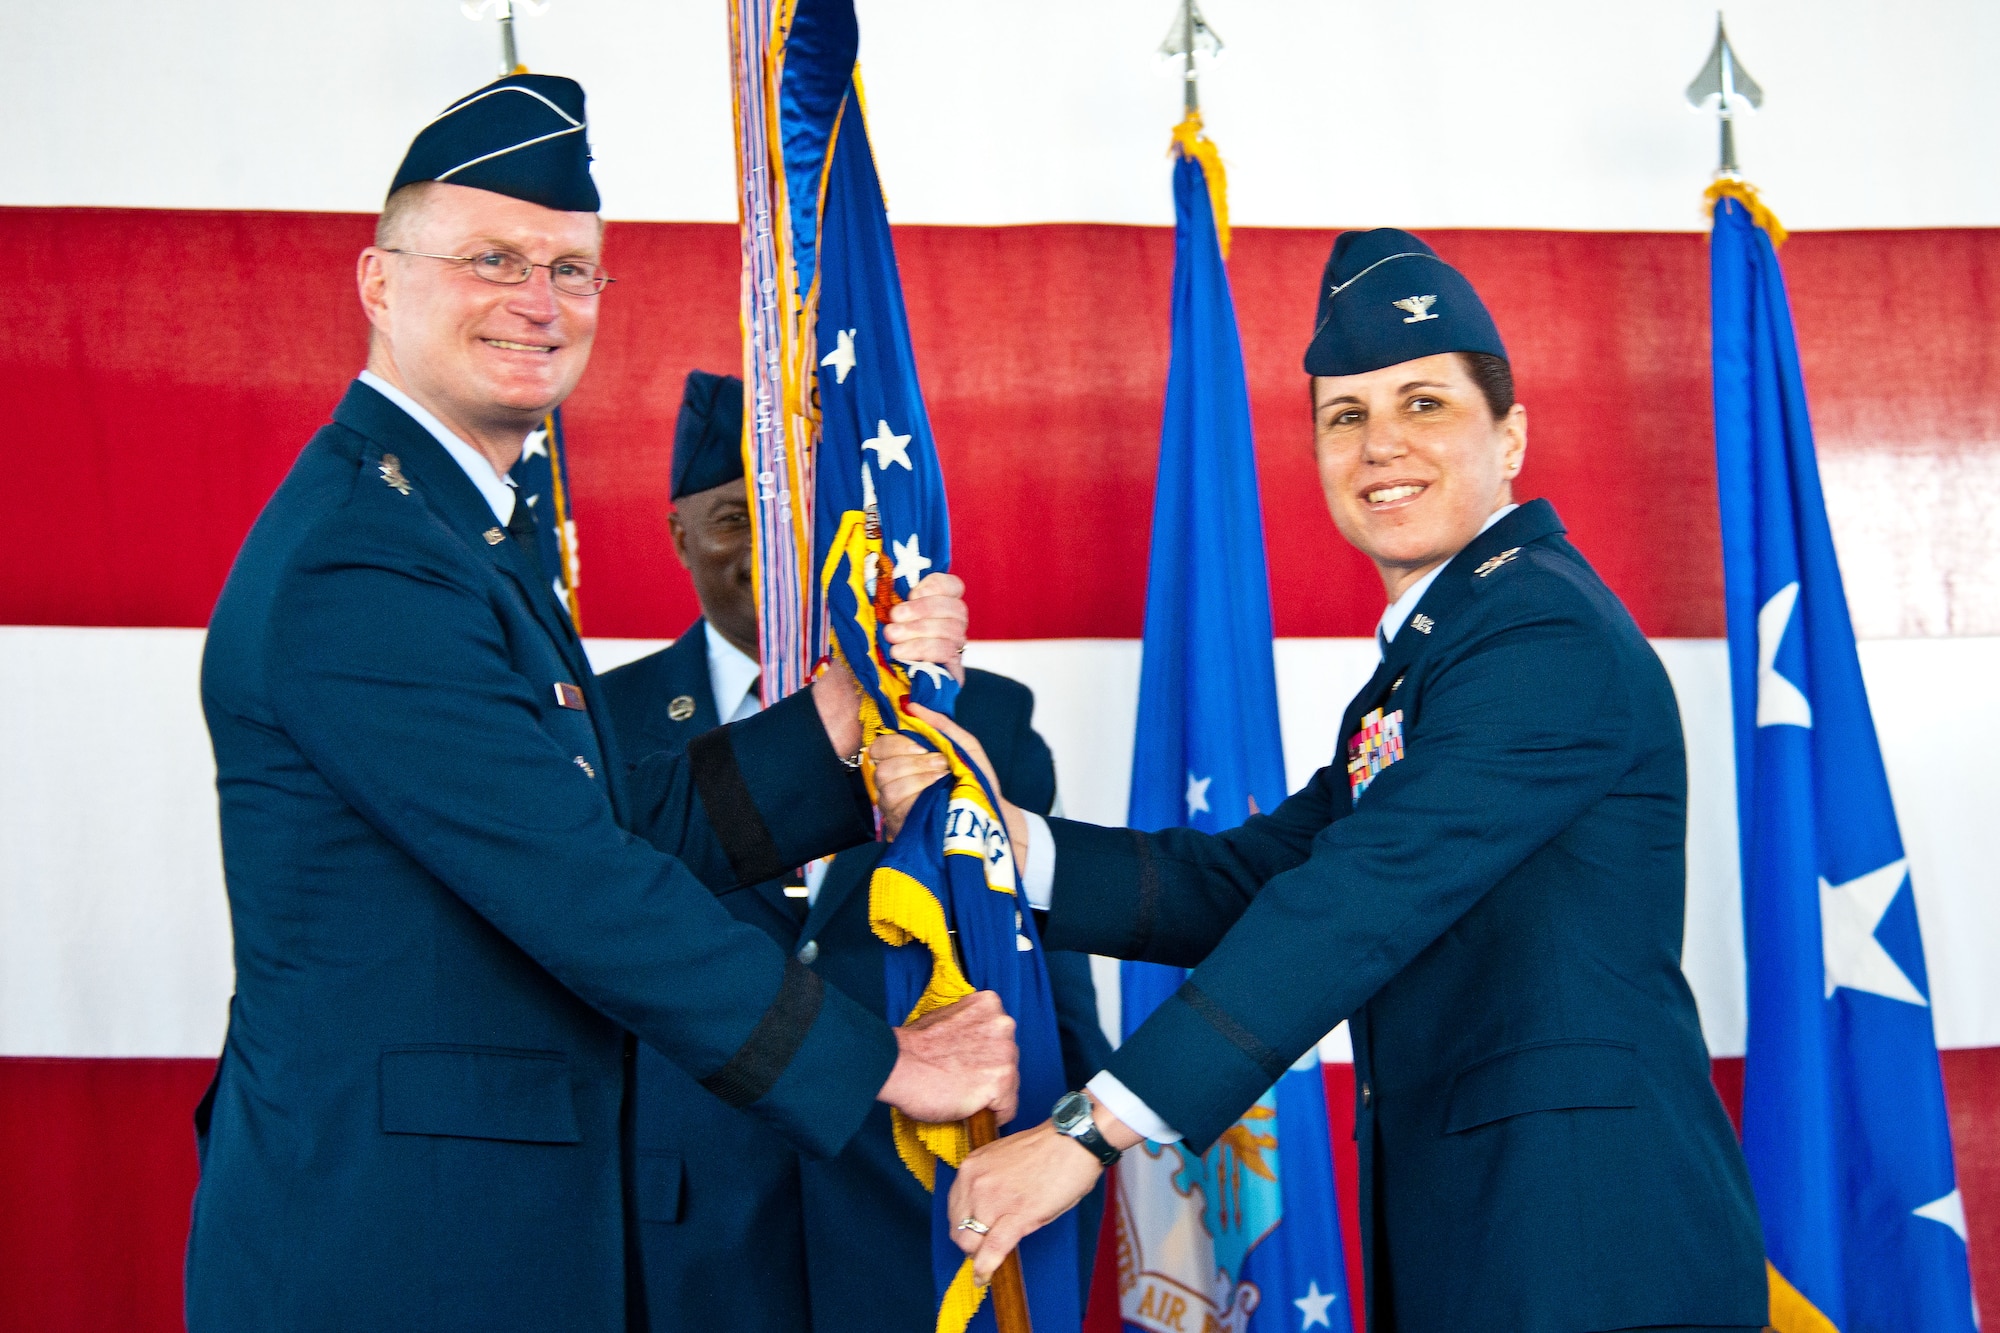 Lt. Gen. David Fadok, commander and president of Air University, hands the wing flag to , Col. Andrea Tullos, new commander for the 42nd Air Base Wing, during the change of command ceremony May 30. The colonel comes to Maxwell from the Pentagon, where she served as chief of the Arabian Peninsula and Iraq Division on the Joint Staff. (U.S. Air Force photo by Donna Burnett)